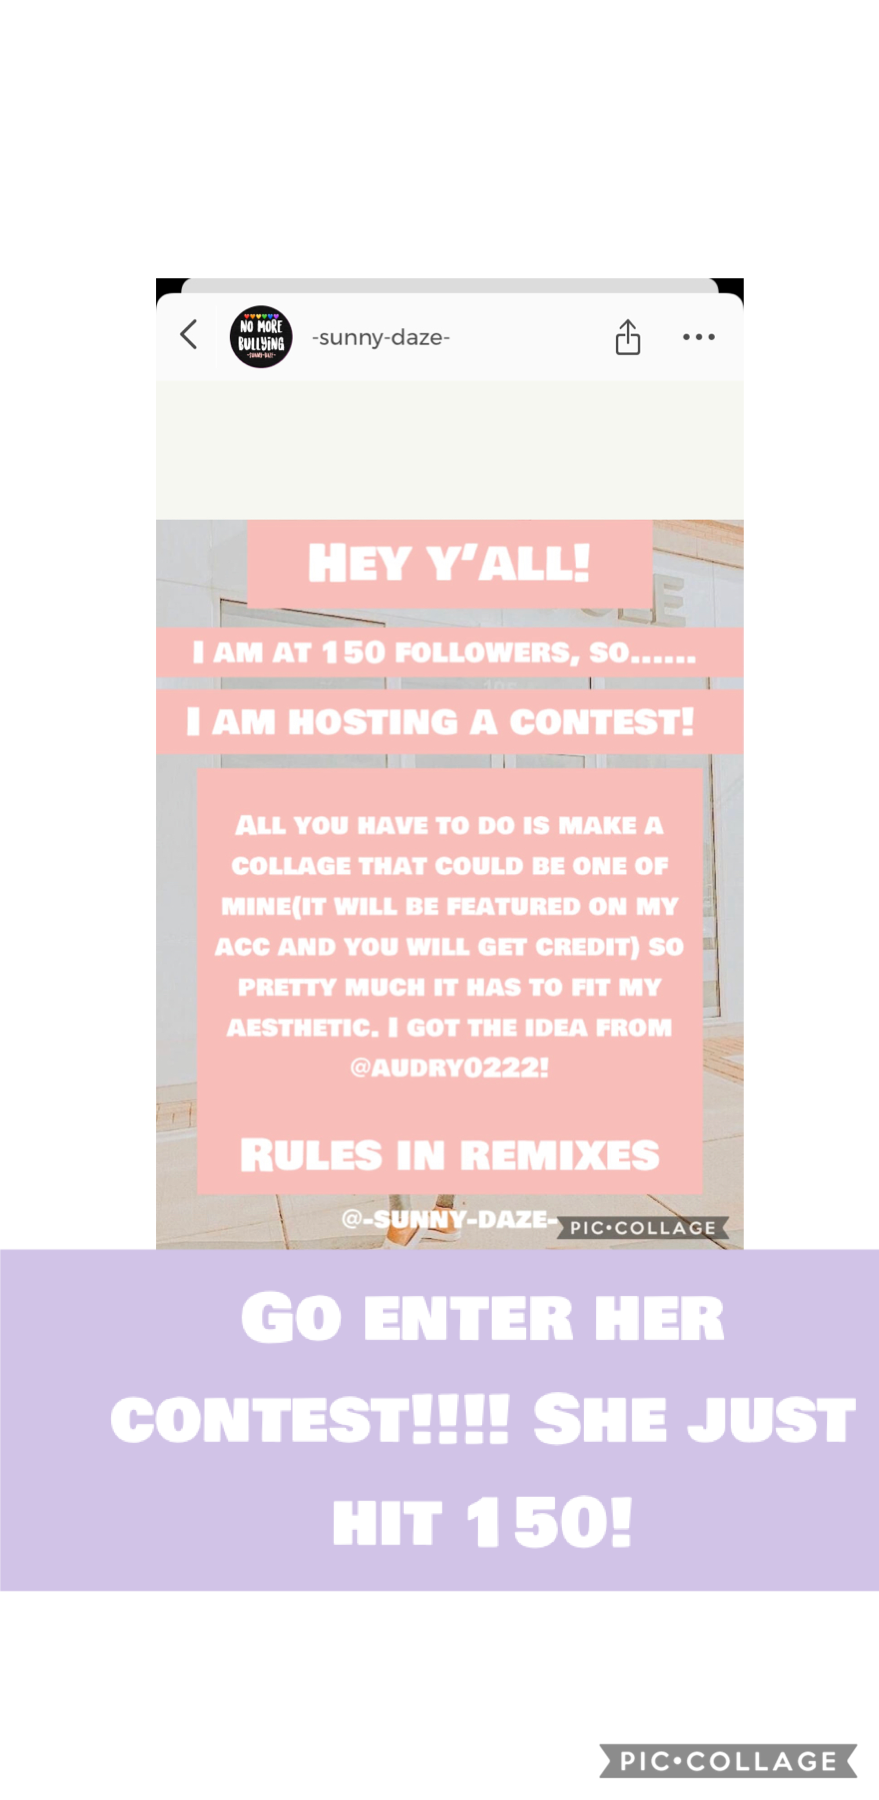 Go follow and enter her contest!